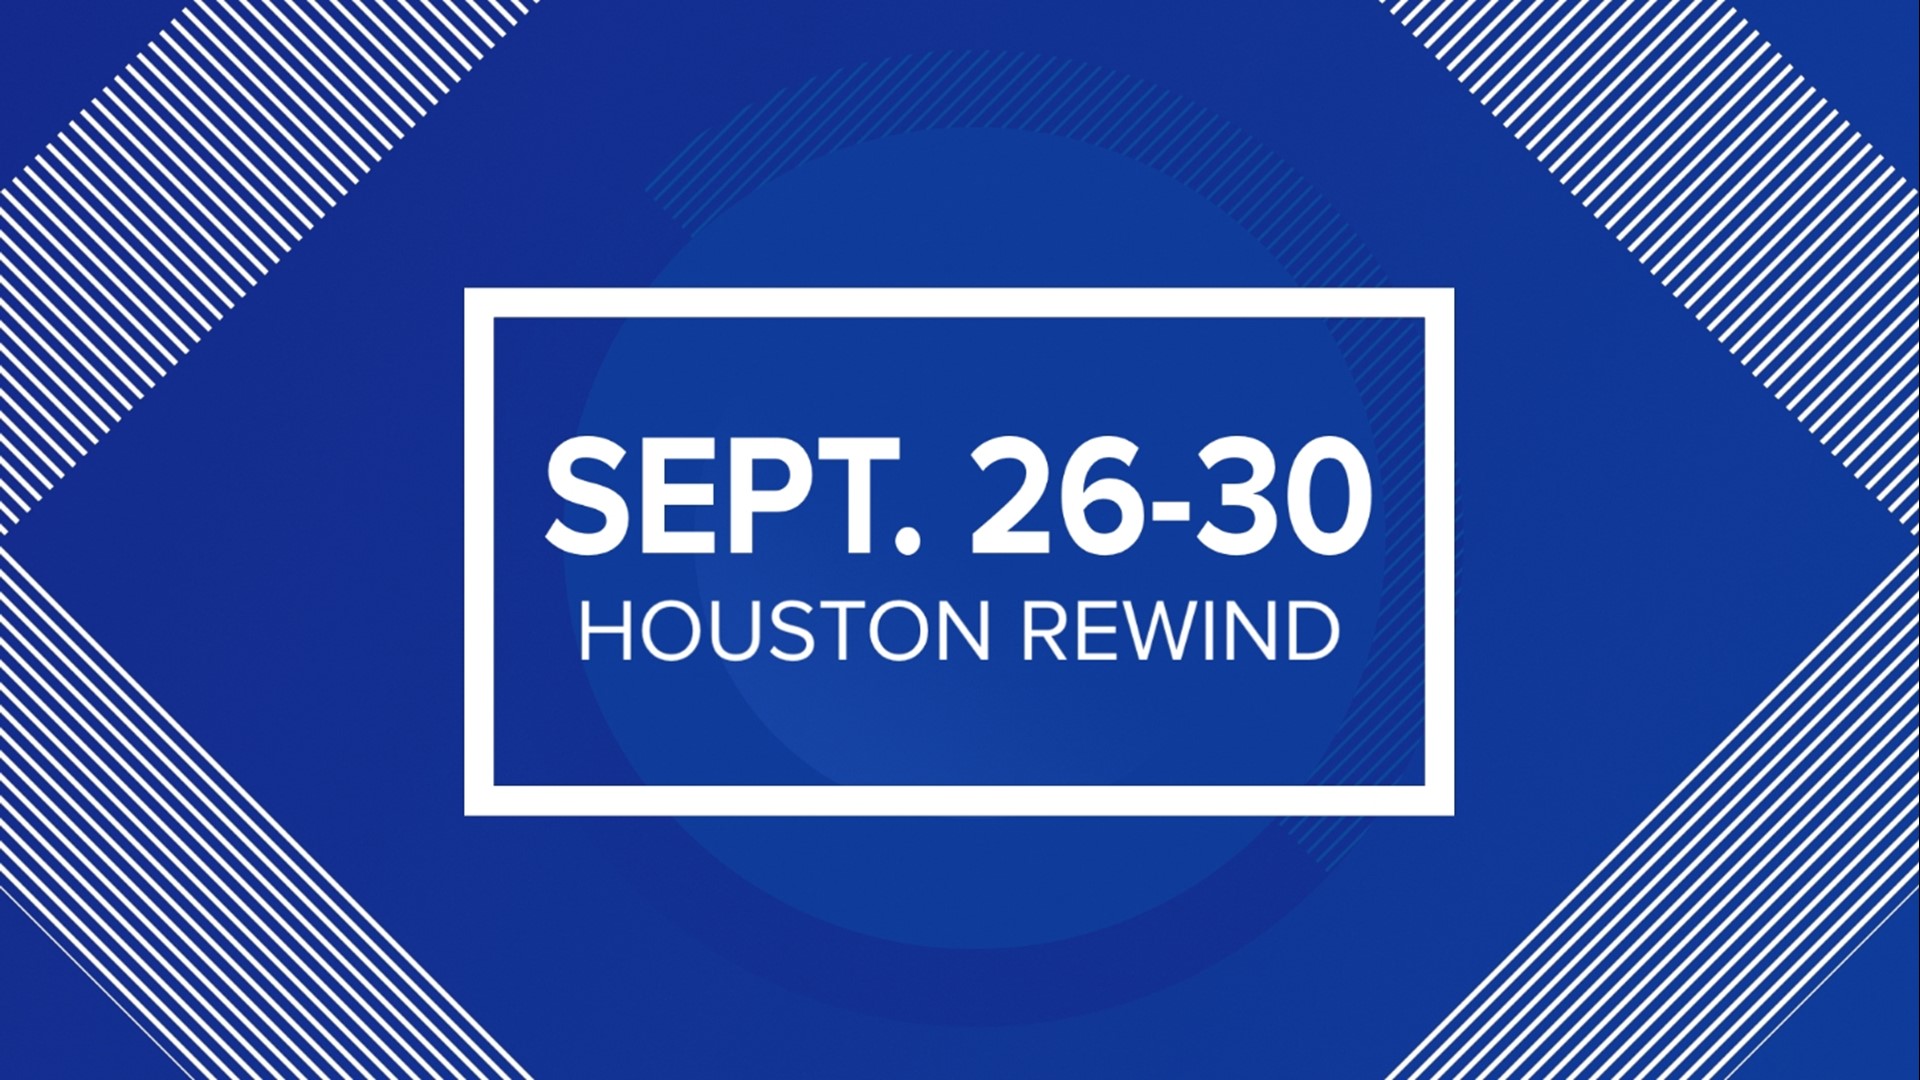 In every episode of the KHOU 11 Houston Rewind, we get you caught up on stories you may have missed this week so you're ready for next week.